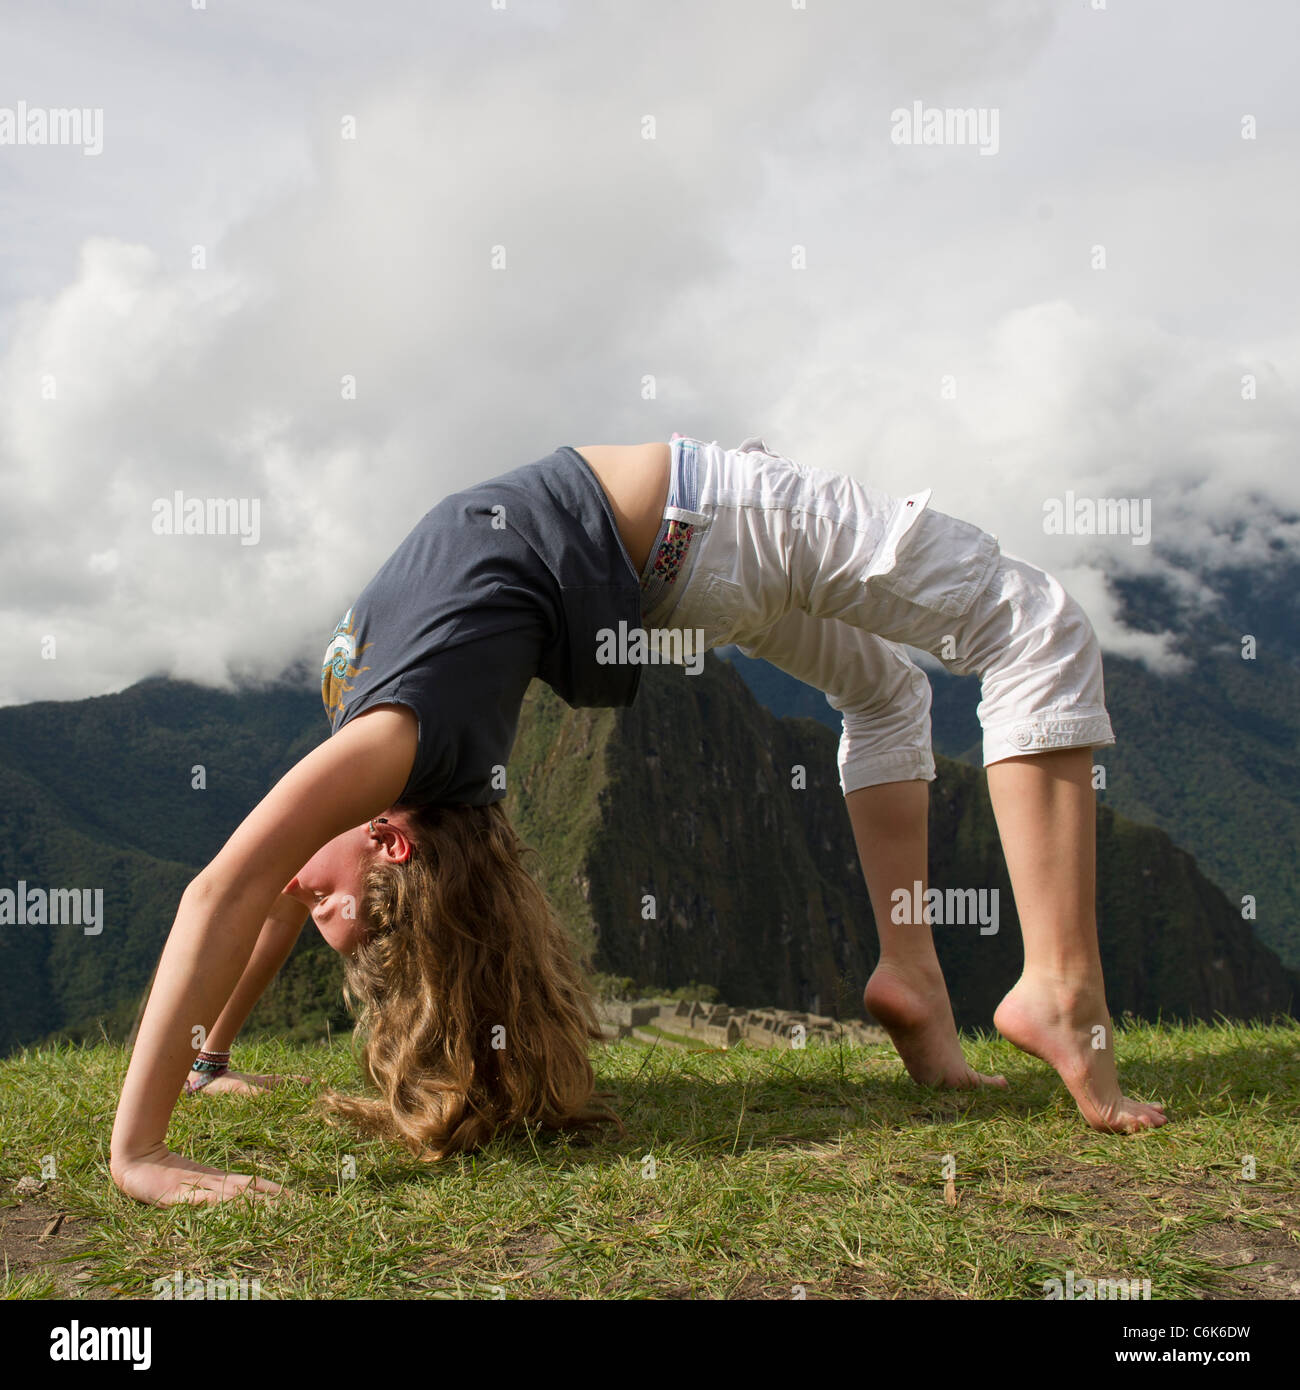 Teenage girl doing wheel pose with valley in the background, The Lost City of The Incas, Machu Picchu, Cusco Region, Peru Stock Photo